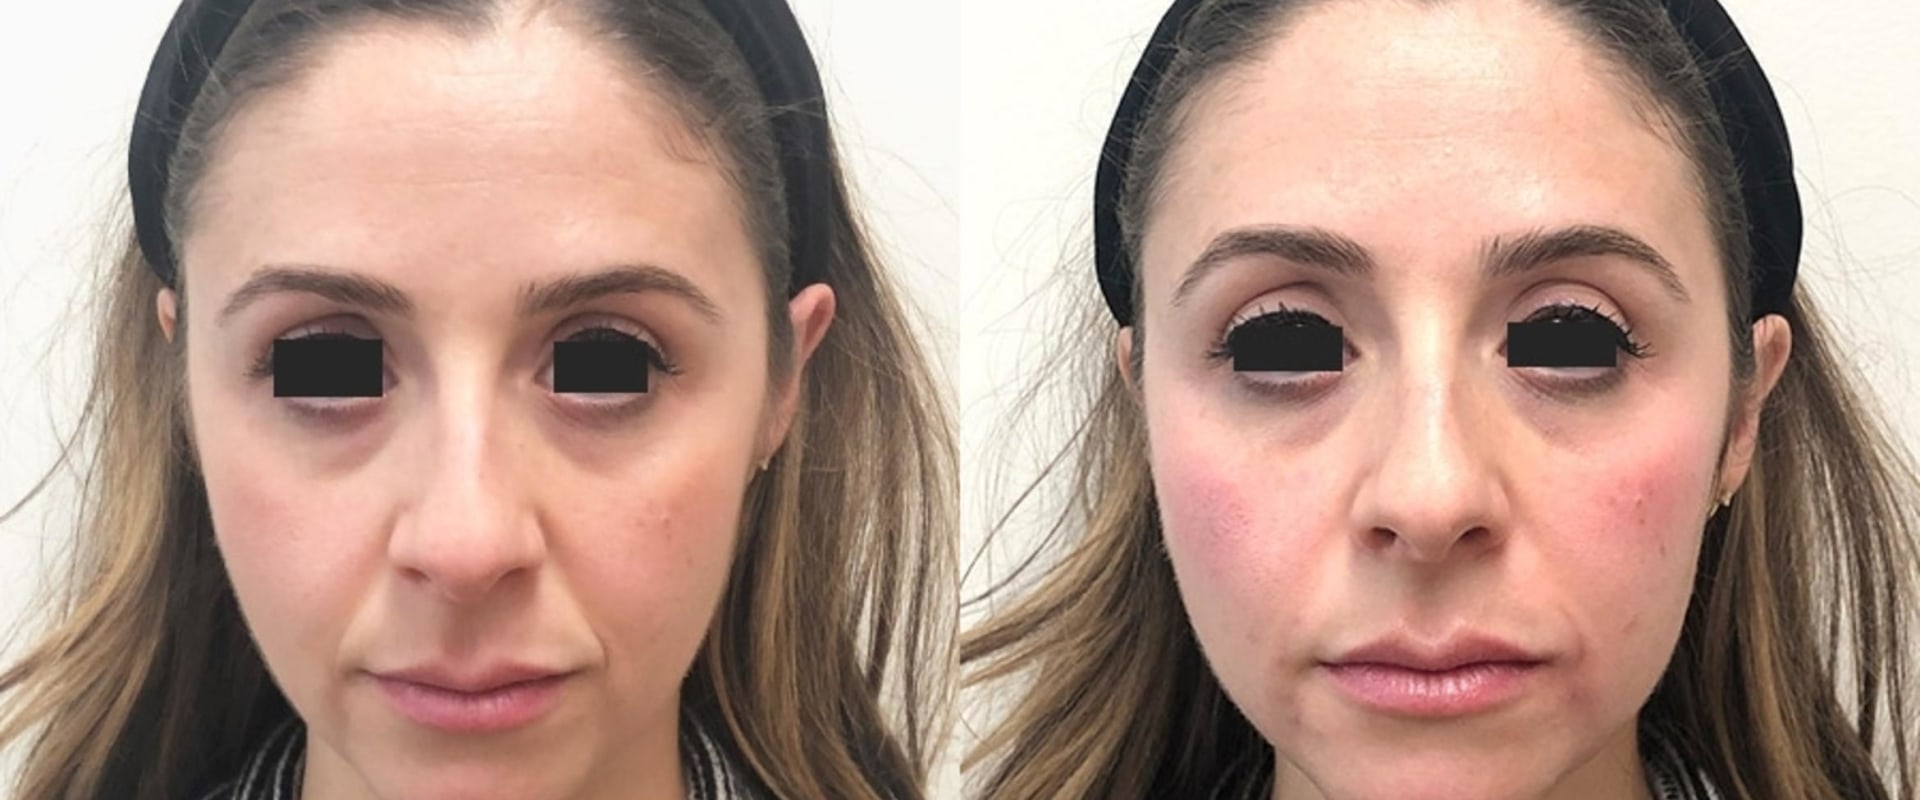 Do you see filler results right away?